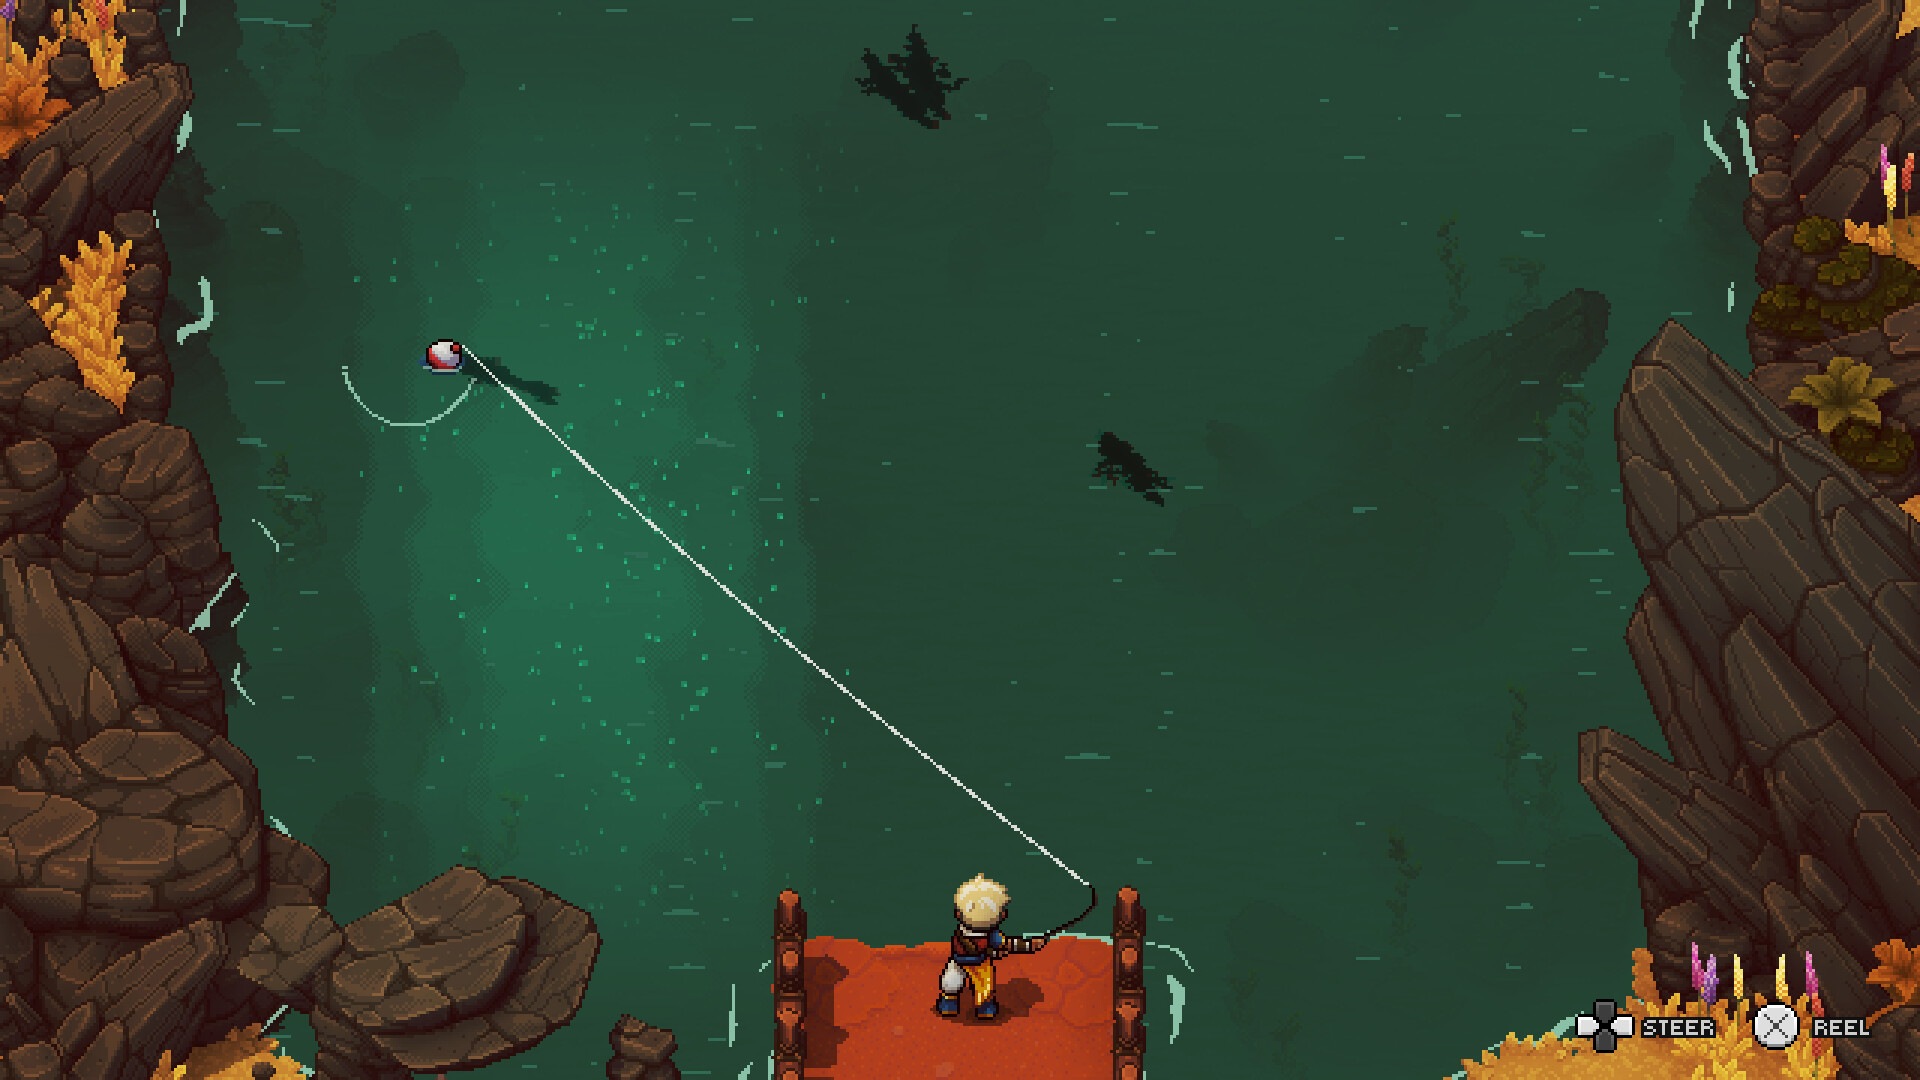 Fishing is one of the most soothing activities in the turn-based RPG.